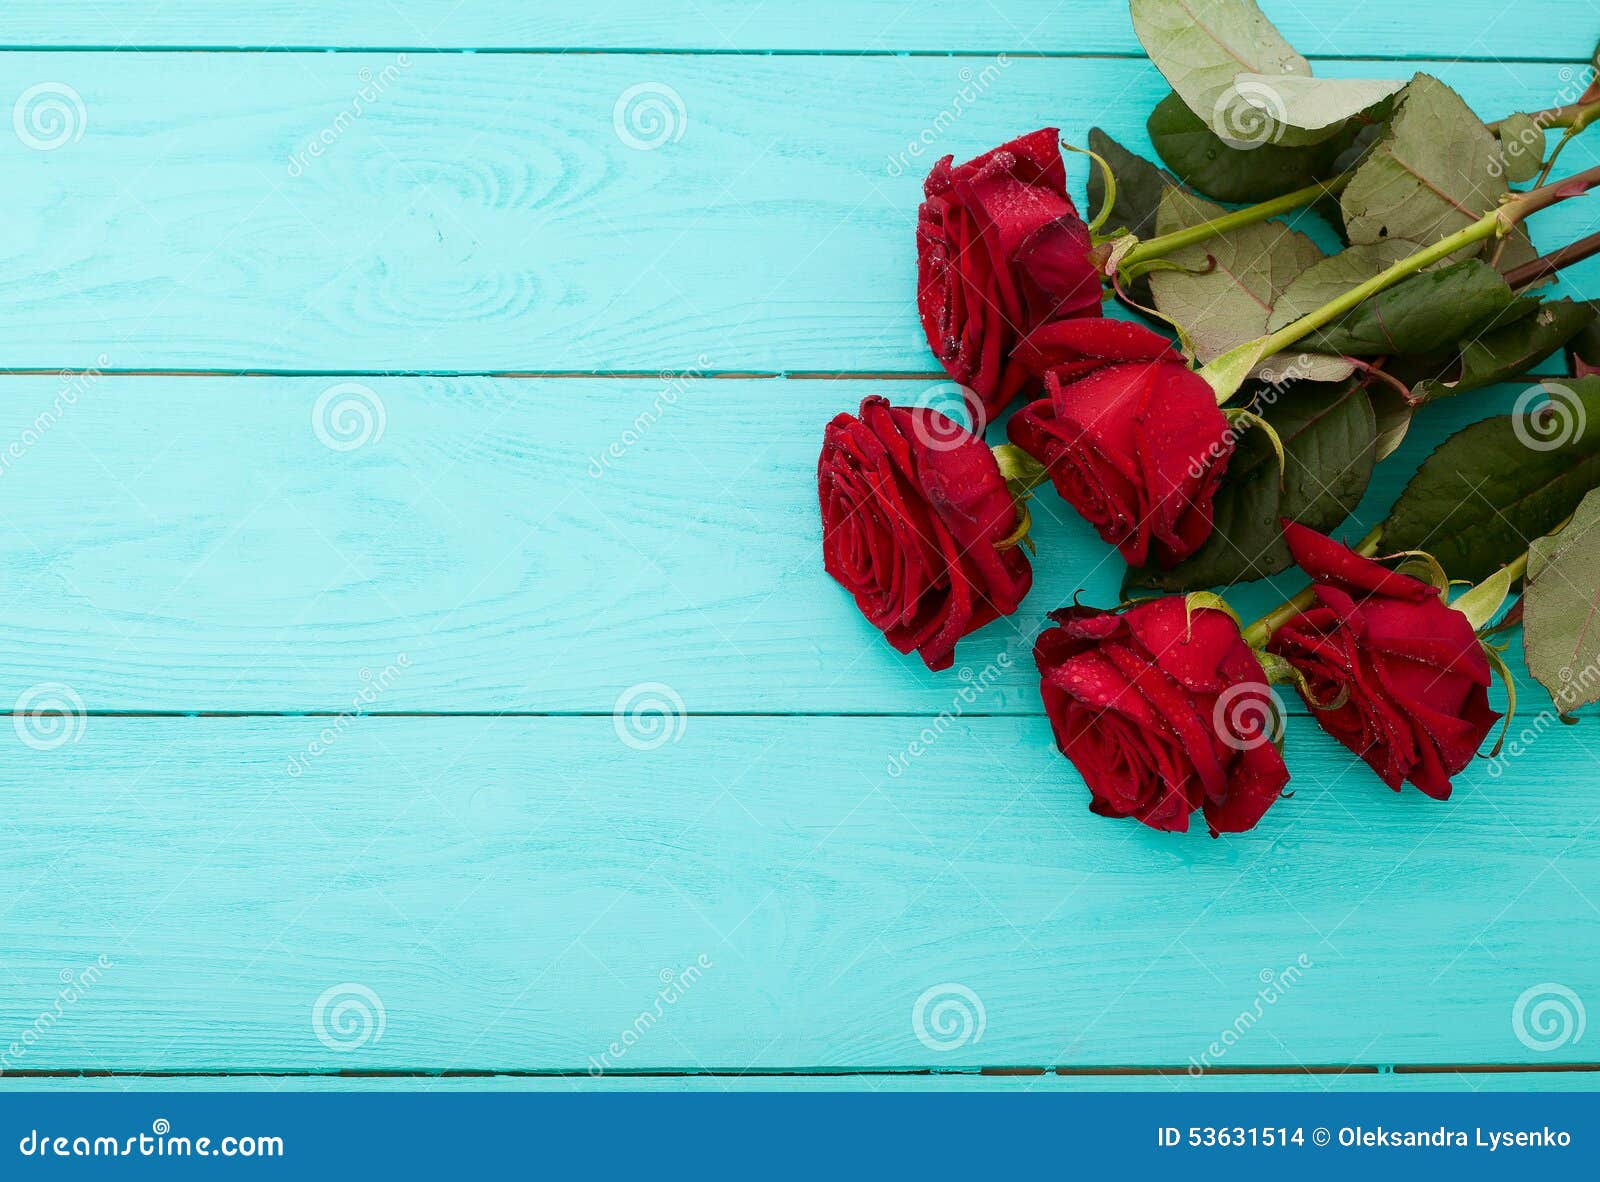 Frame of Red Roses on Blue Wooden Background Stock Photo - Image of ...